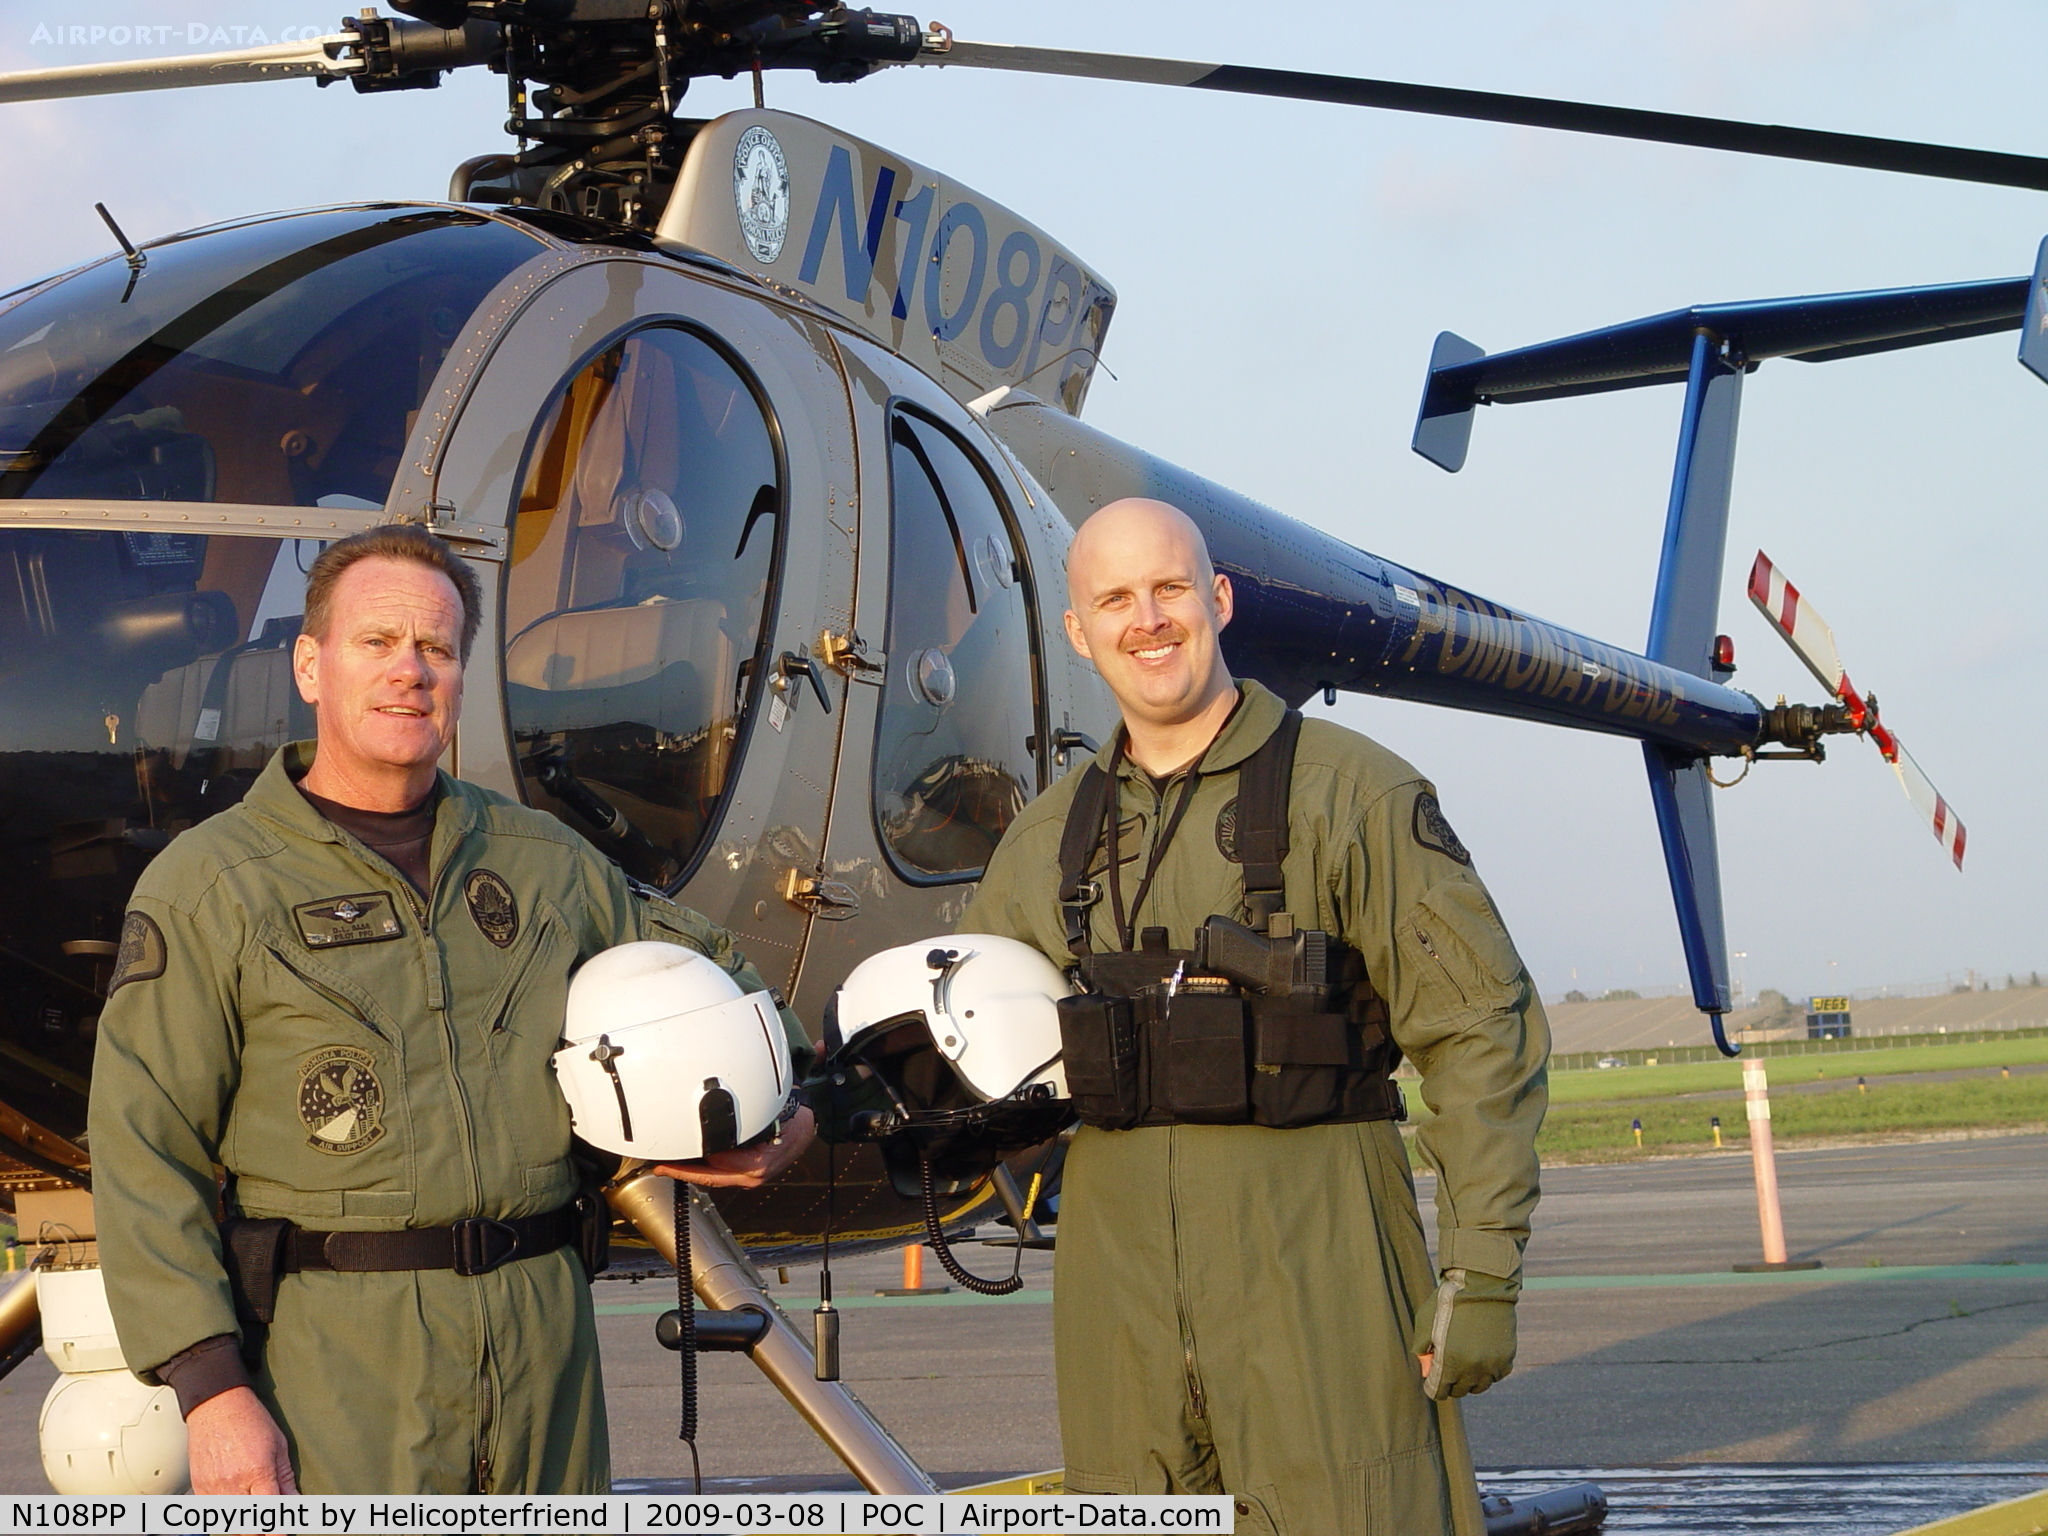 N108PP, 2008 MD Helicopters 369E C/N 0578E, Pomona Police Flight Crew, Sr Pilot Bass, Tactical Flight Officer Cooper